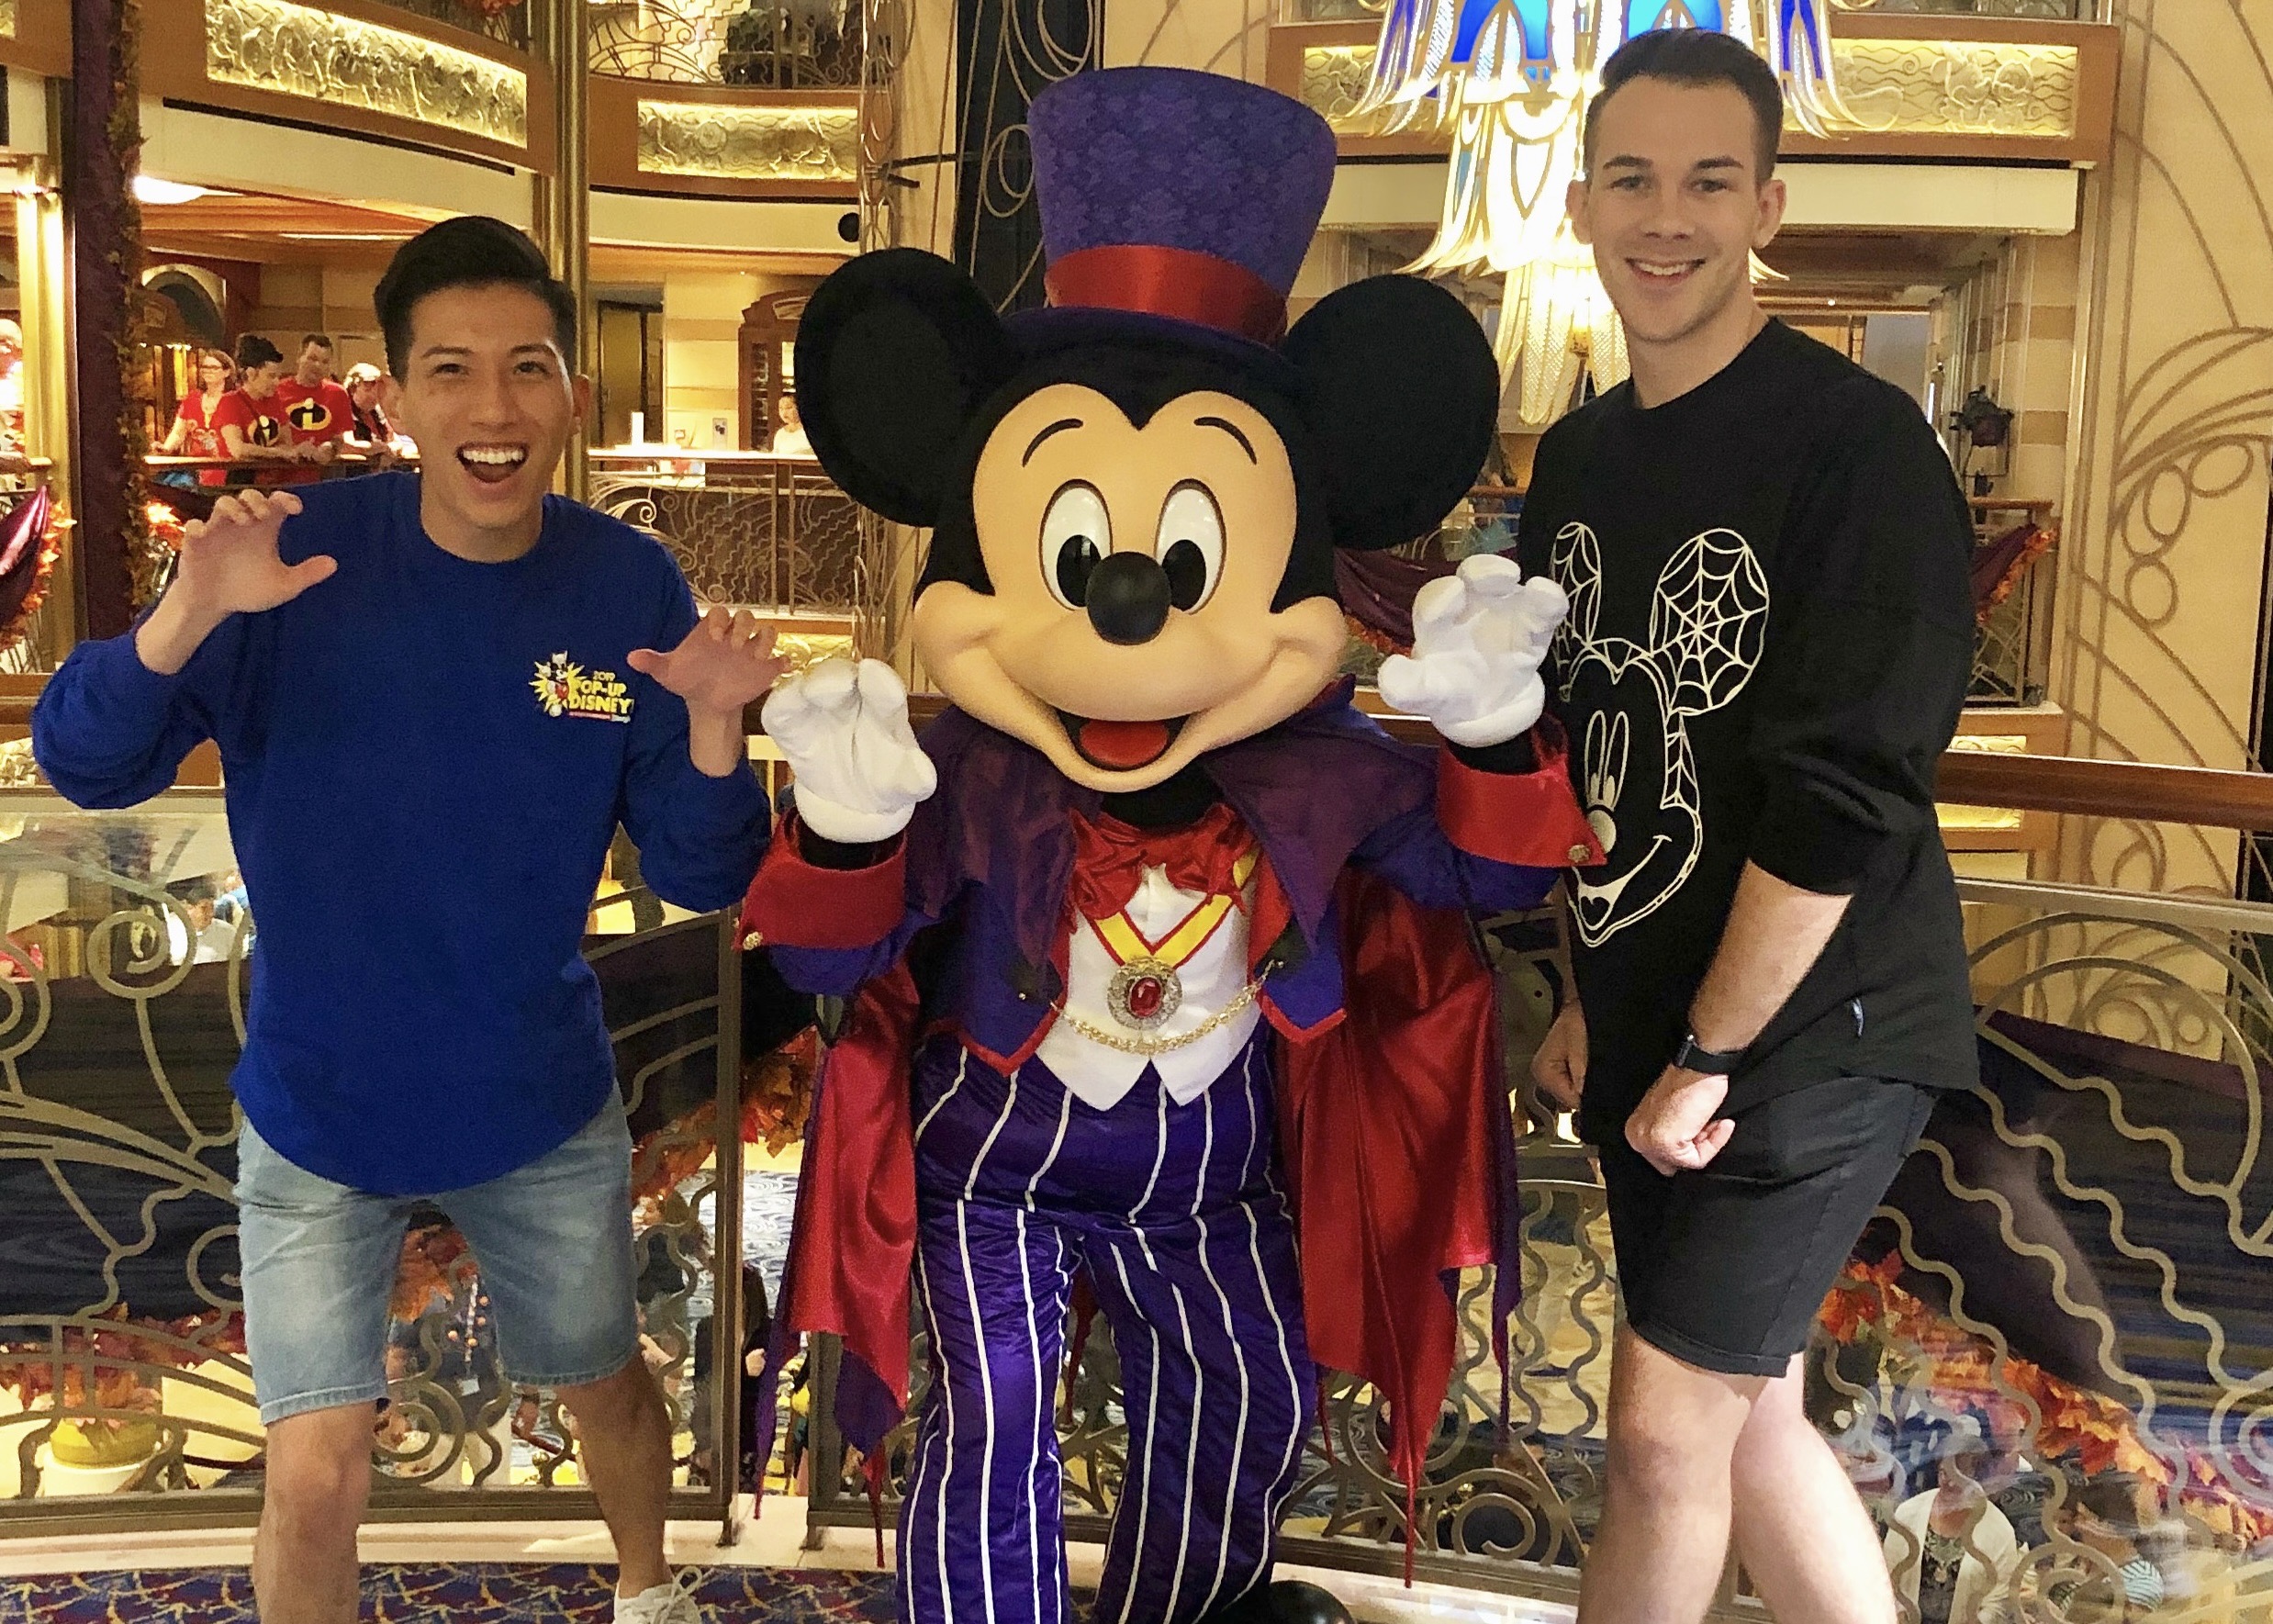 mickey-mouse-in-vampire-costume-for-halloween-on-the-high-seas